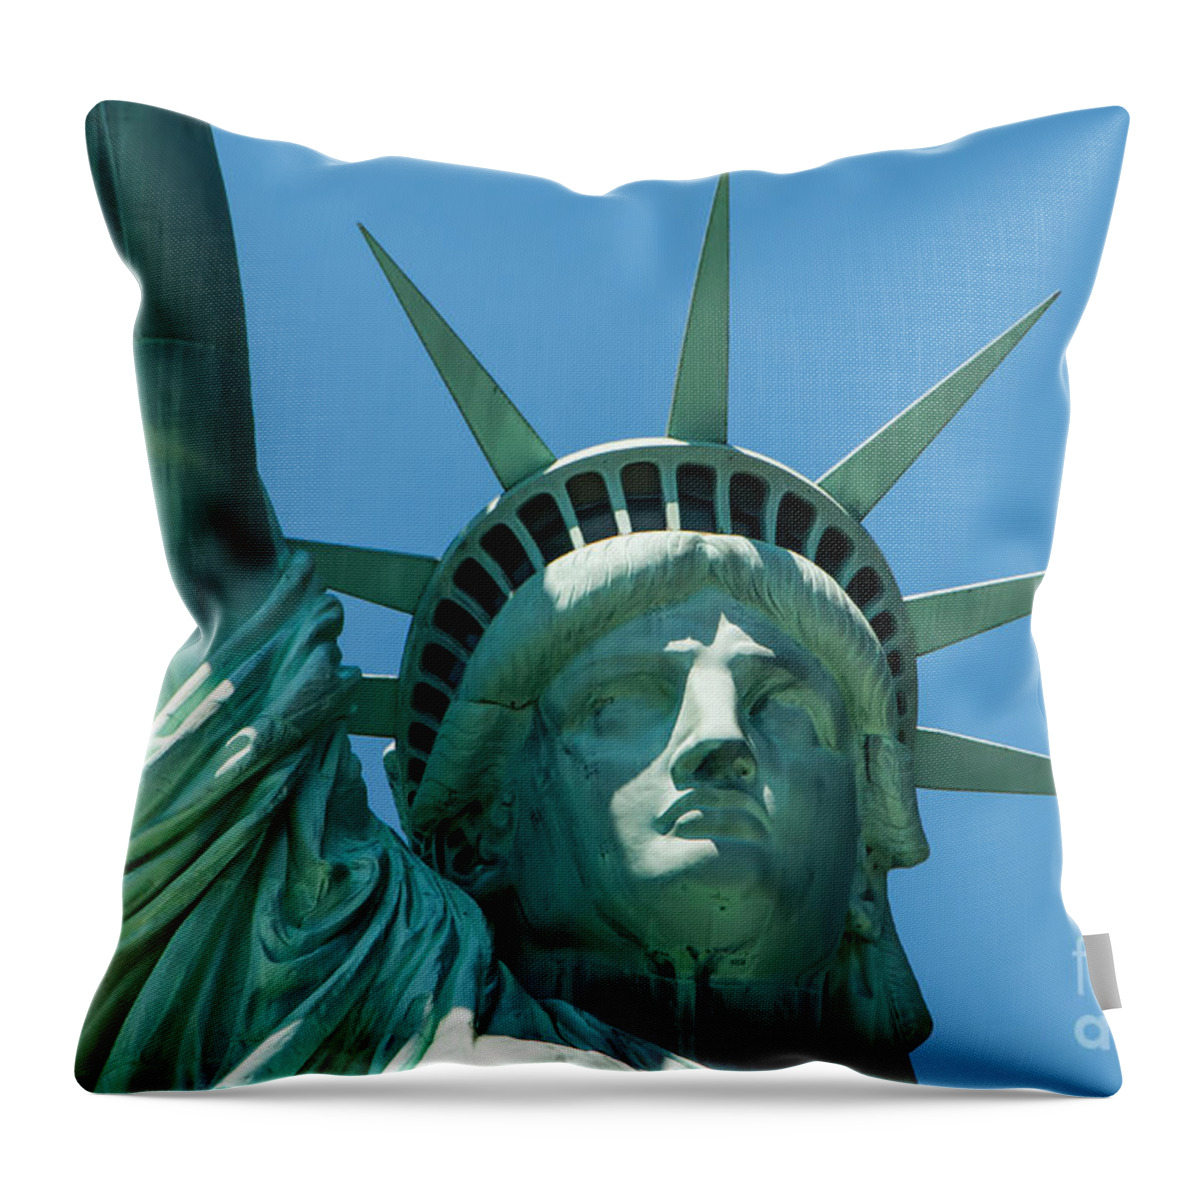 Statue Of Liberty Throw Pillow featuring the photograph Statue of Liberty's Head by Anthony Sacco